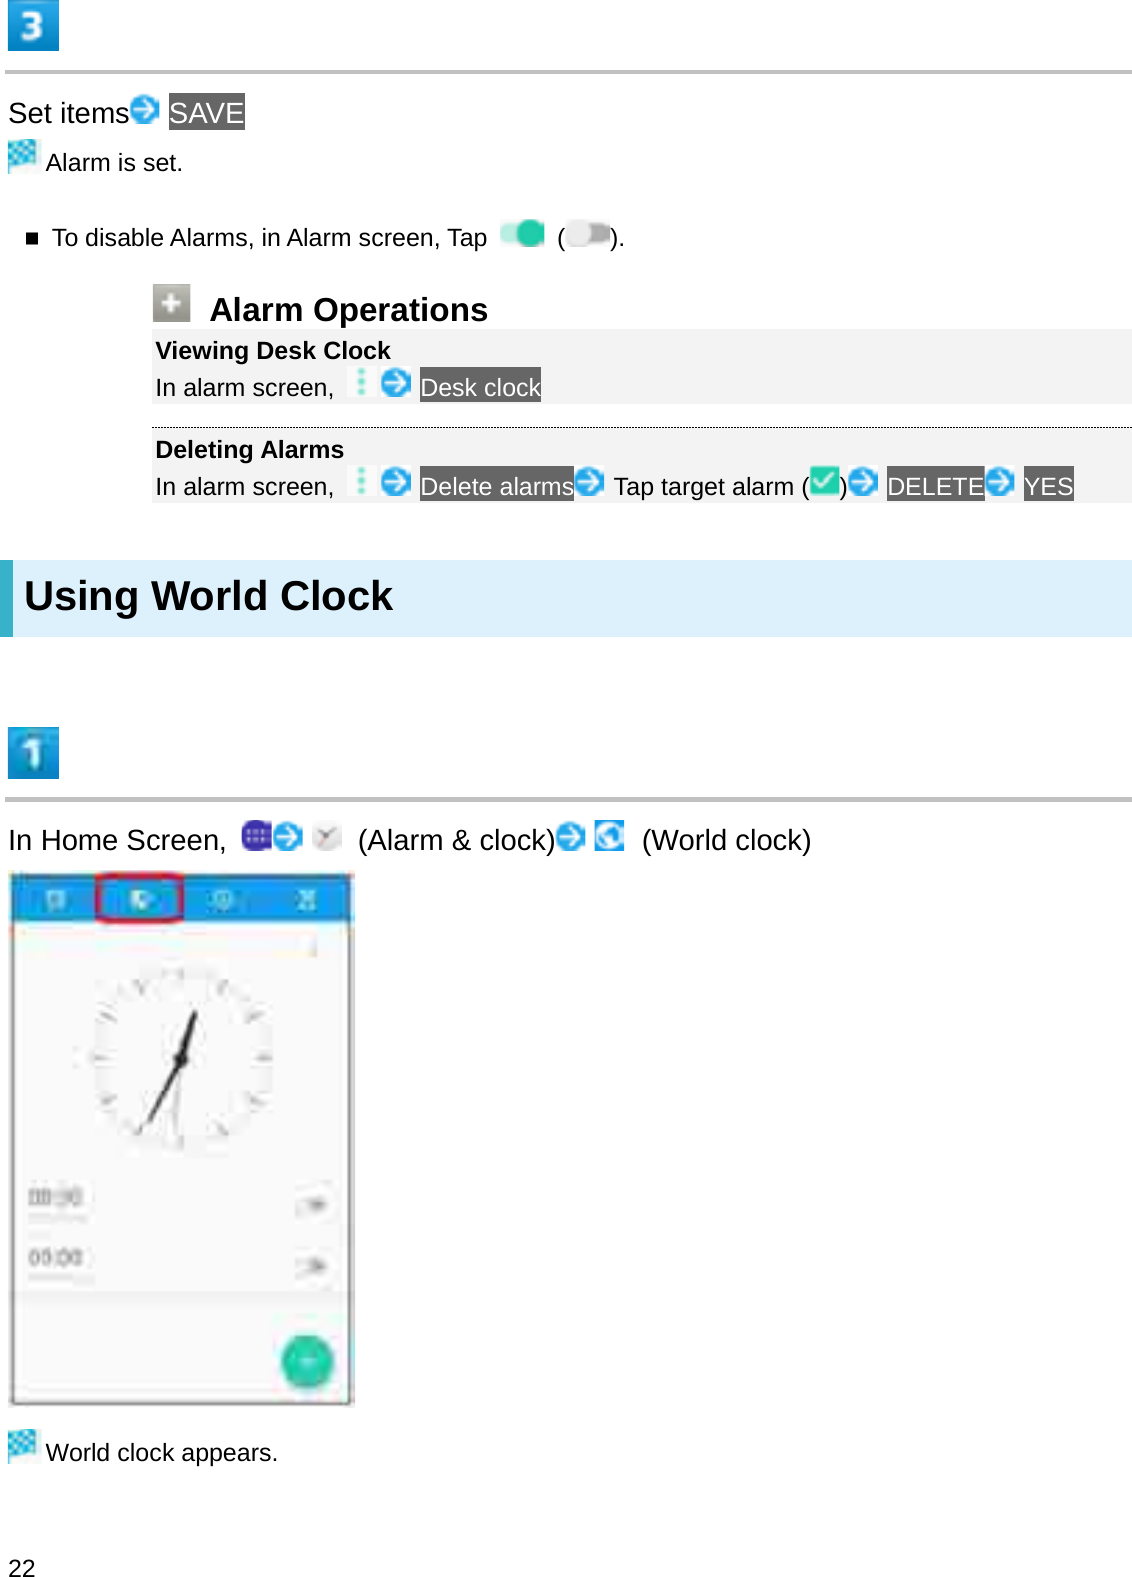 Set items SAVEAlarm is set.To disable Alarms, in Alarm screen, Tap  ().Alarm OperationsViewing Desk ClockIn alarm screen,  Desk clockDeleting AlarmsIn alarm screen,  Delete alarms Tap target alarm ( )DELETE YESUsing World ClockIn Home Screen,  (Alarm &amp; clock) (World clock)World clock appears.22